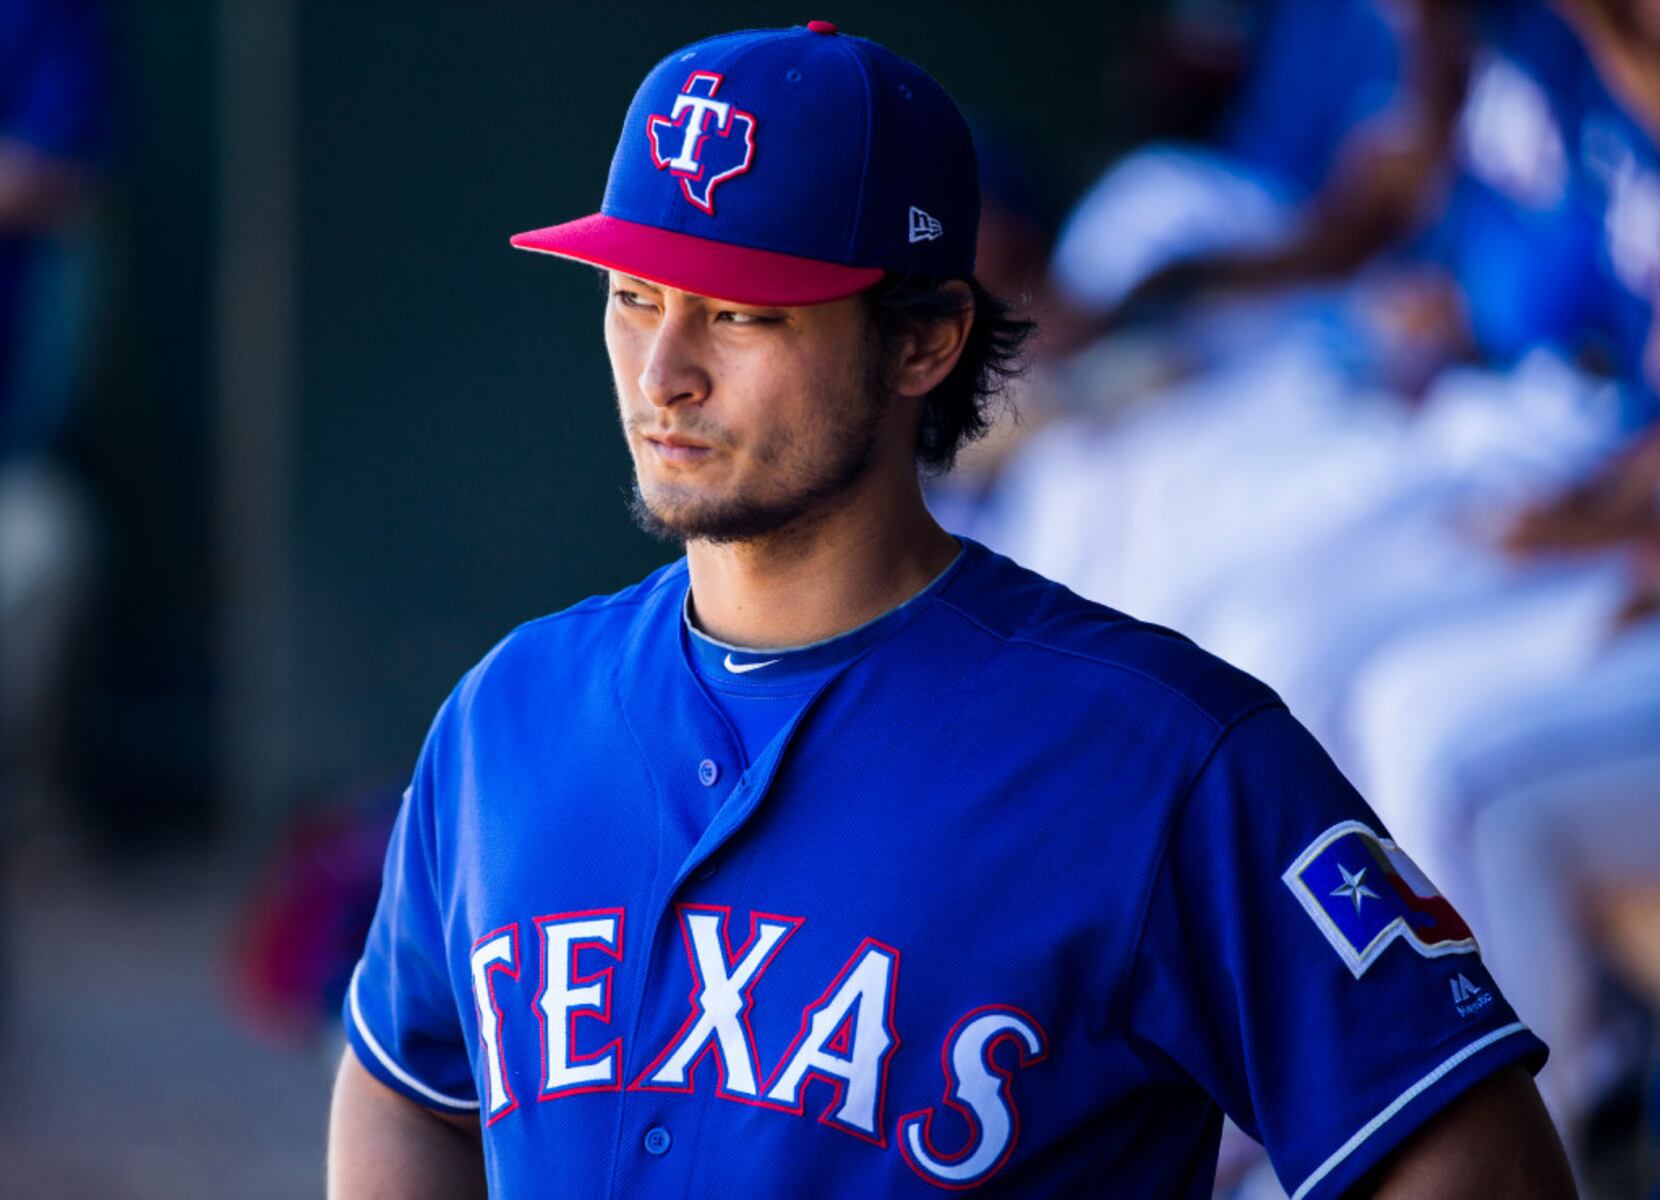 10 things you may not know about ex-Ranger Yu Darvish, like being